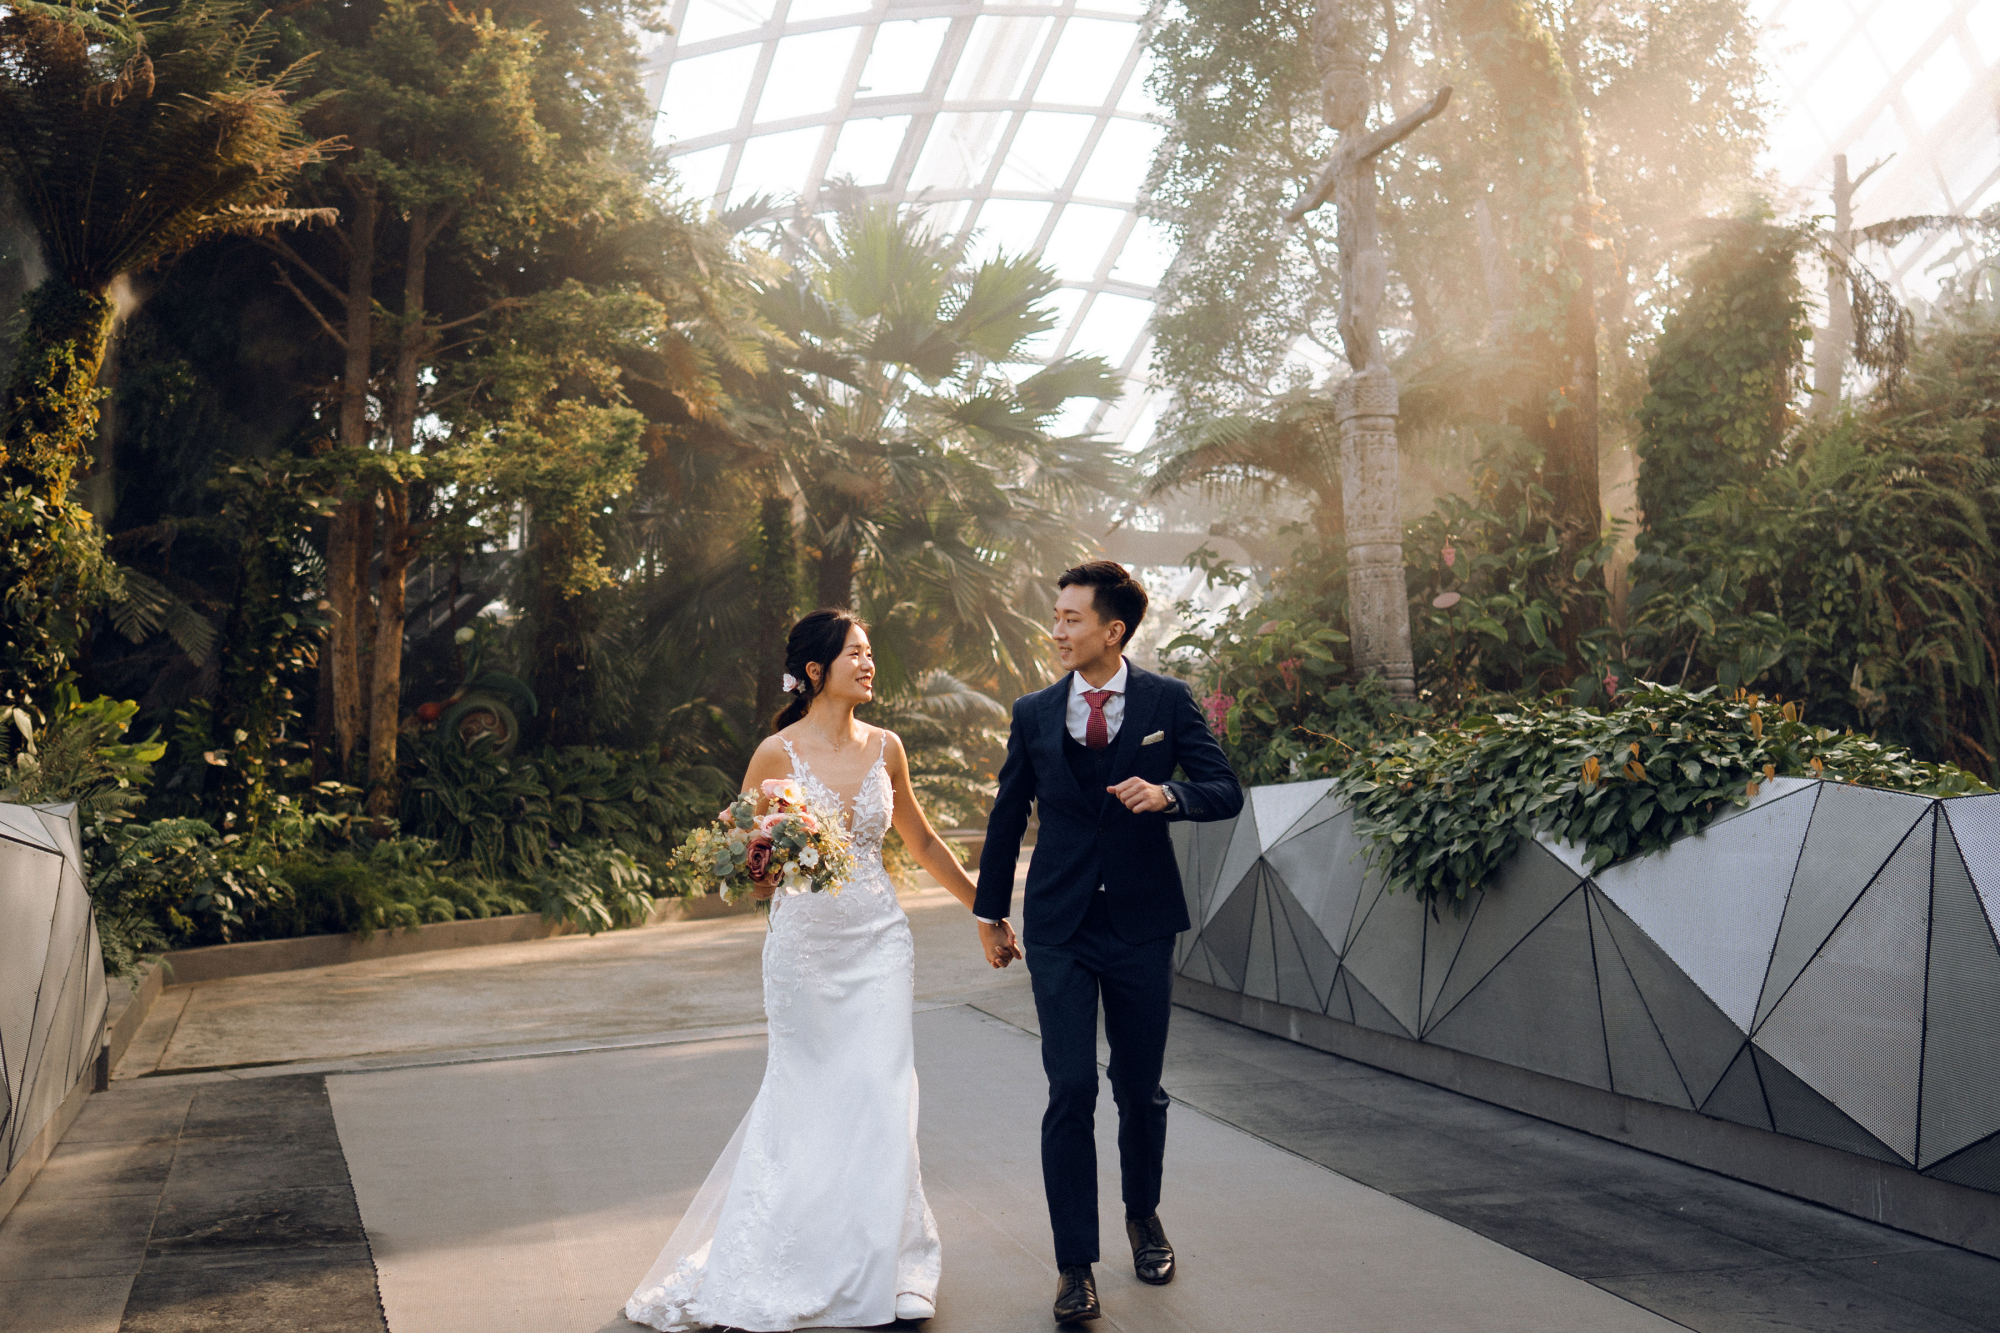 Sunset Prewedding Photoshoot At Cloud Forest, Gardens By The Bay  by Samantha on OneThreeOneFour 5